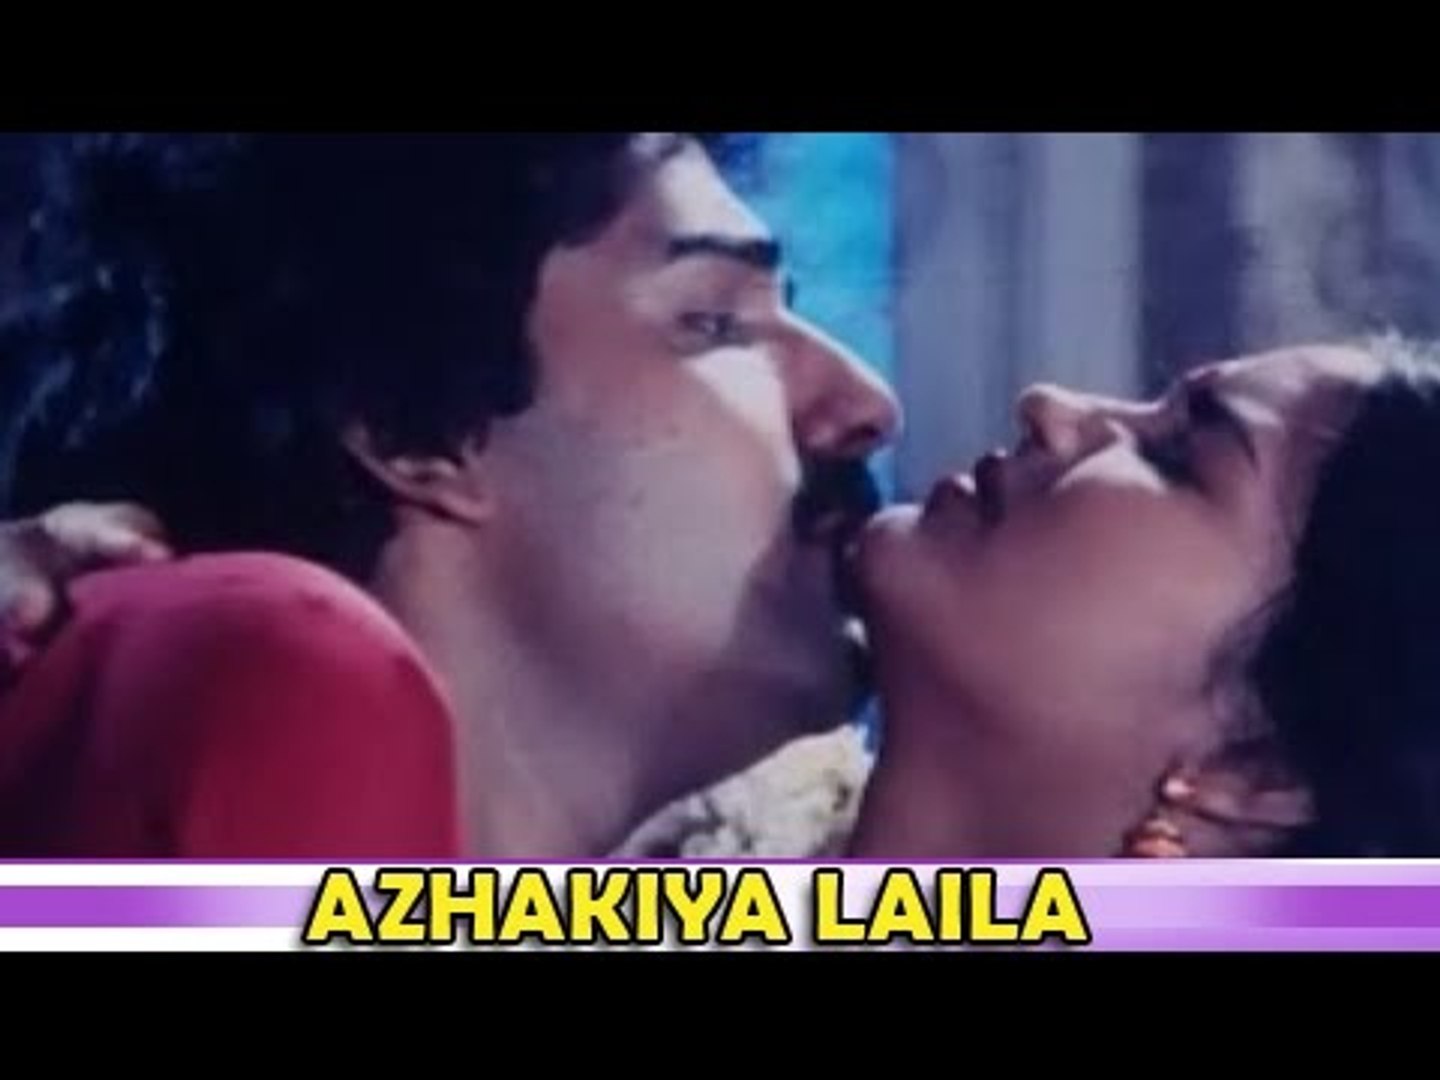 Tamil Actor Laila Sex Video - Tamil Movie - Azhakiya Laila - Part 3 Out Of 6 [HD] - video Dailymotion